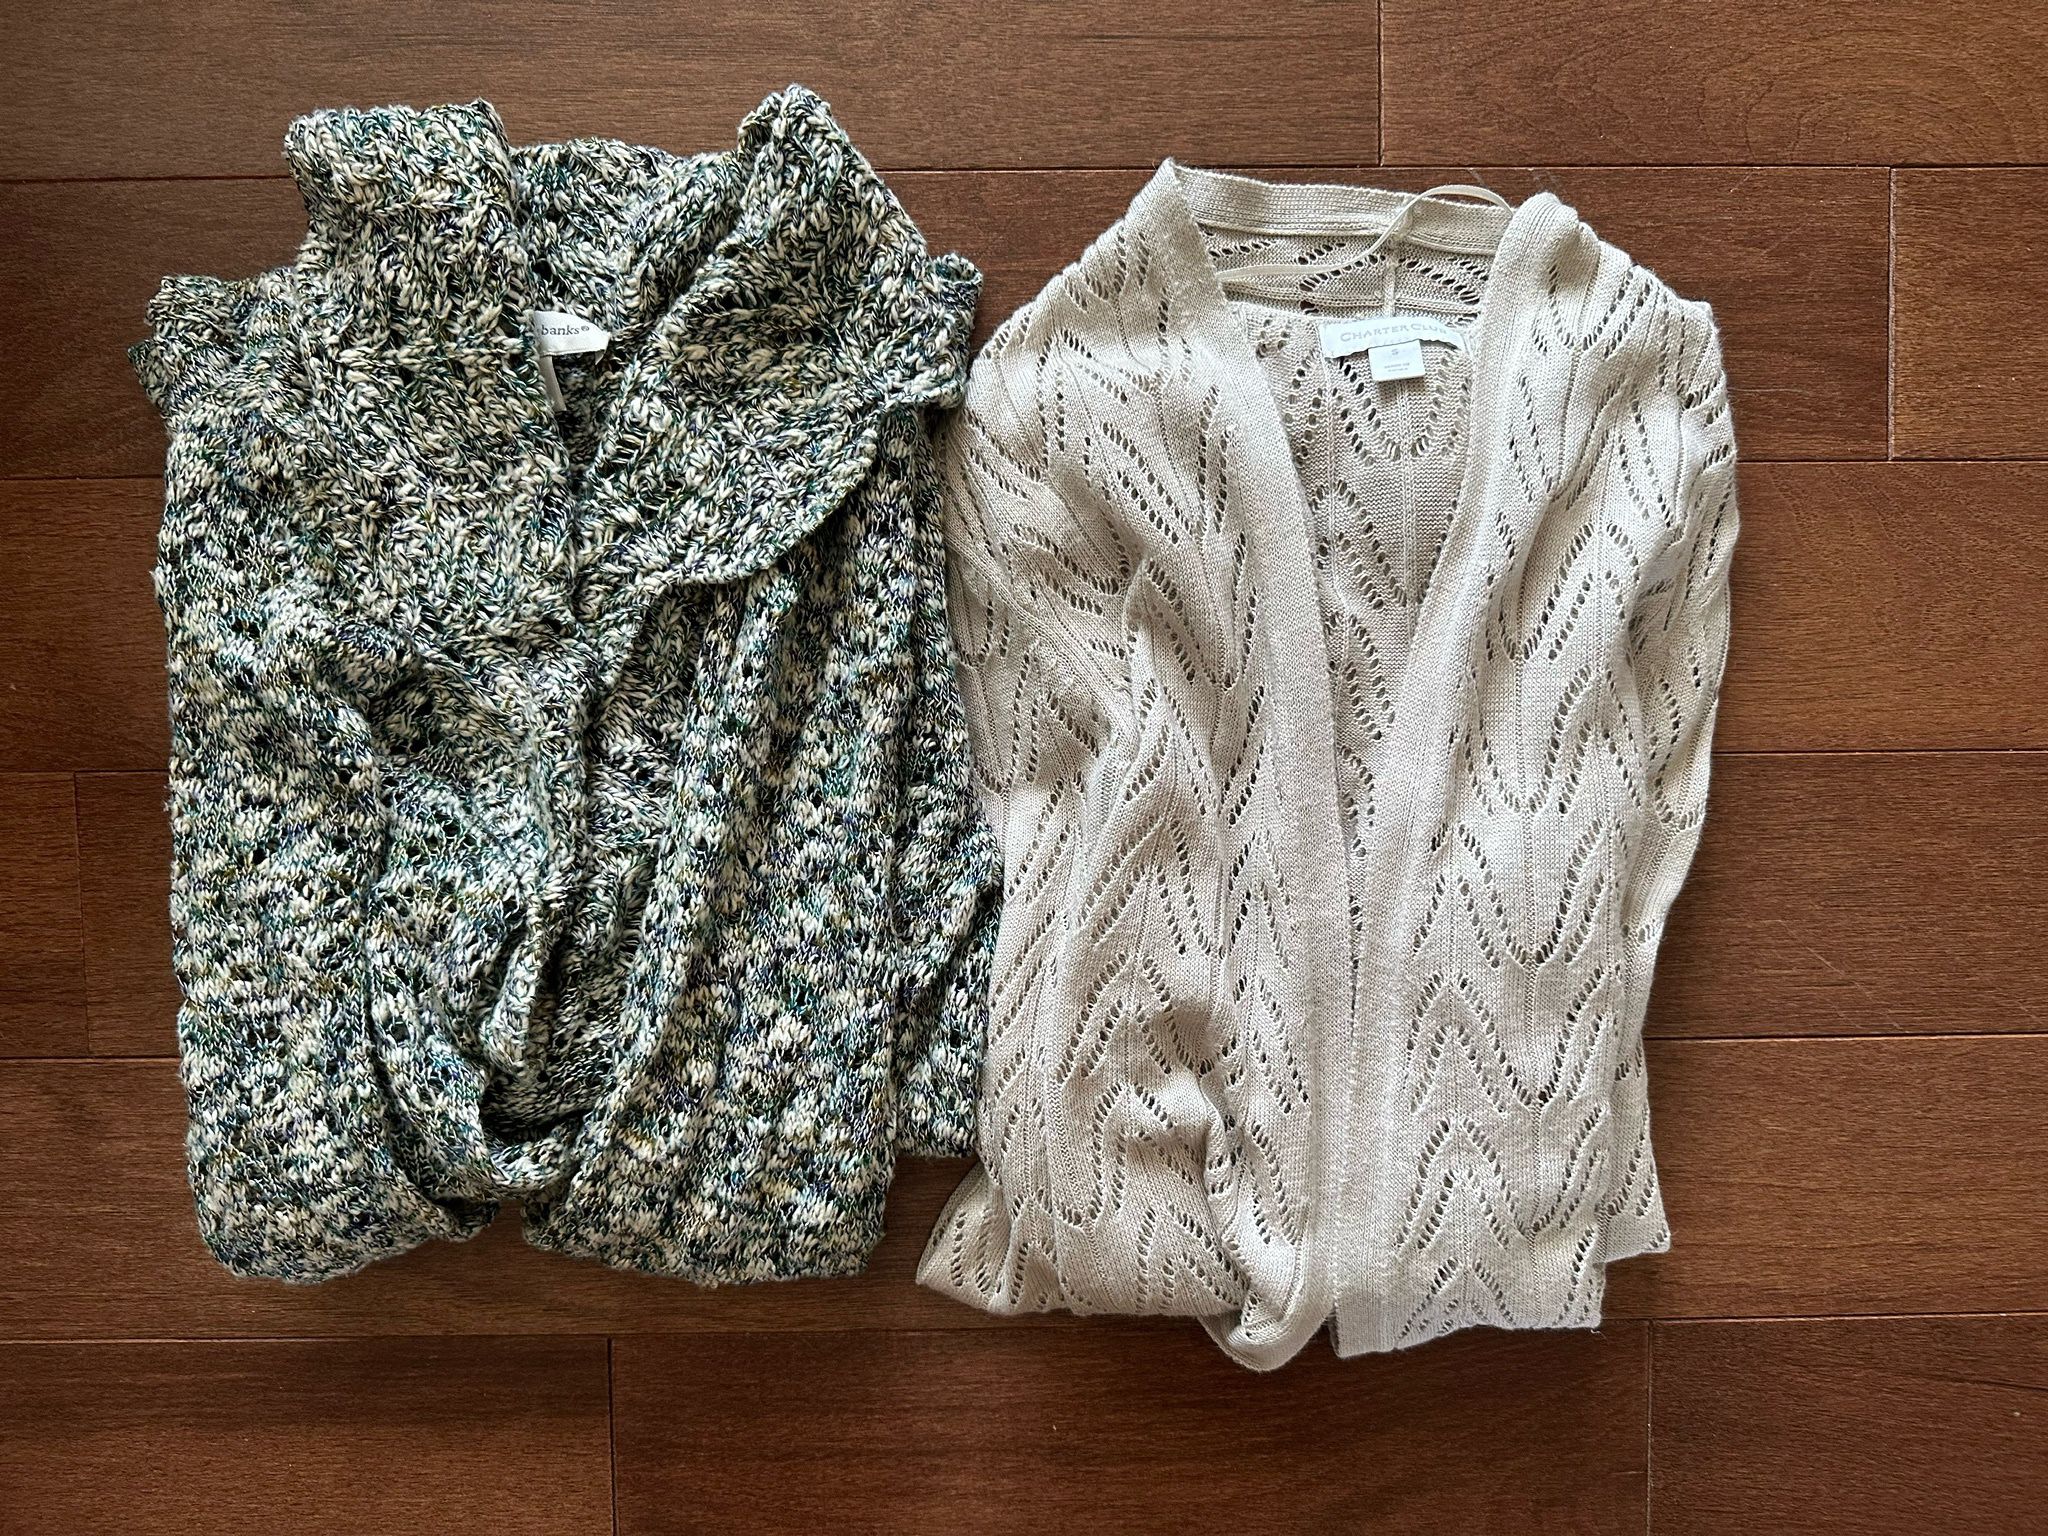 2 Small SHRUGS, CARDIGANS: Green, cream Christopher & Banks + beige Charter Club